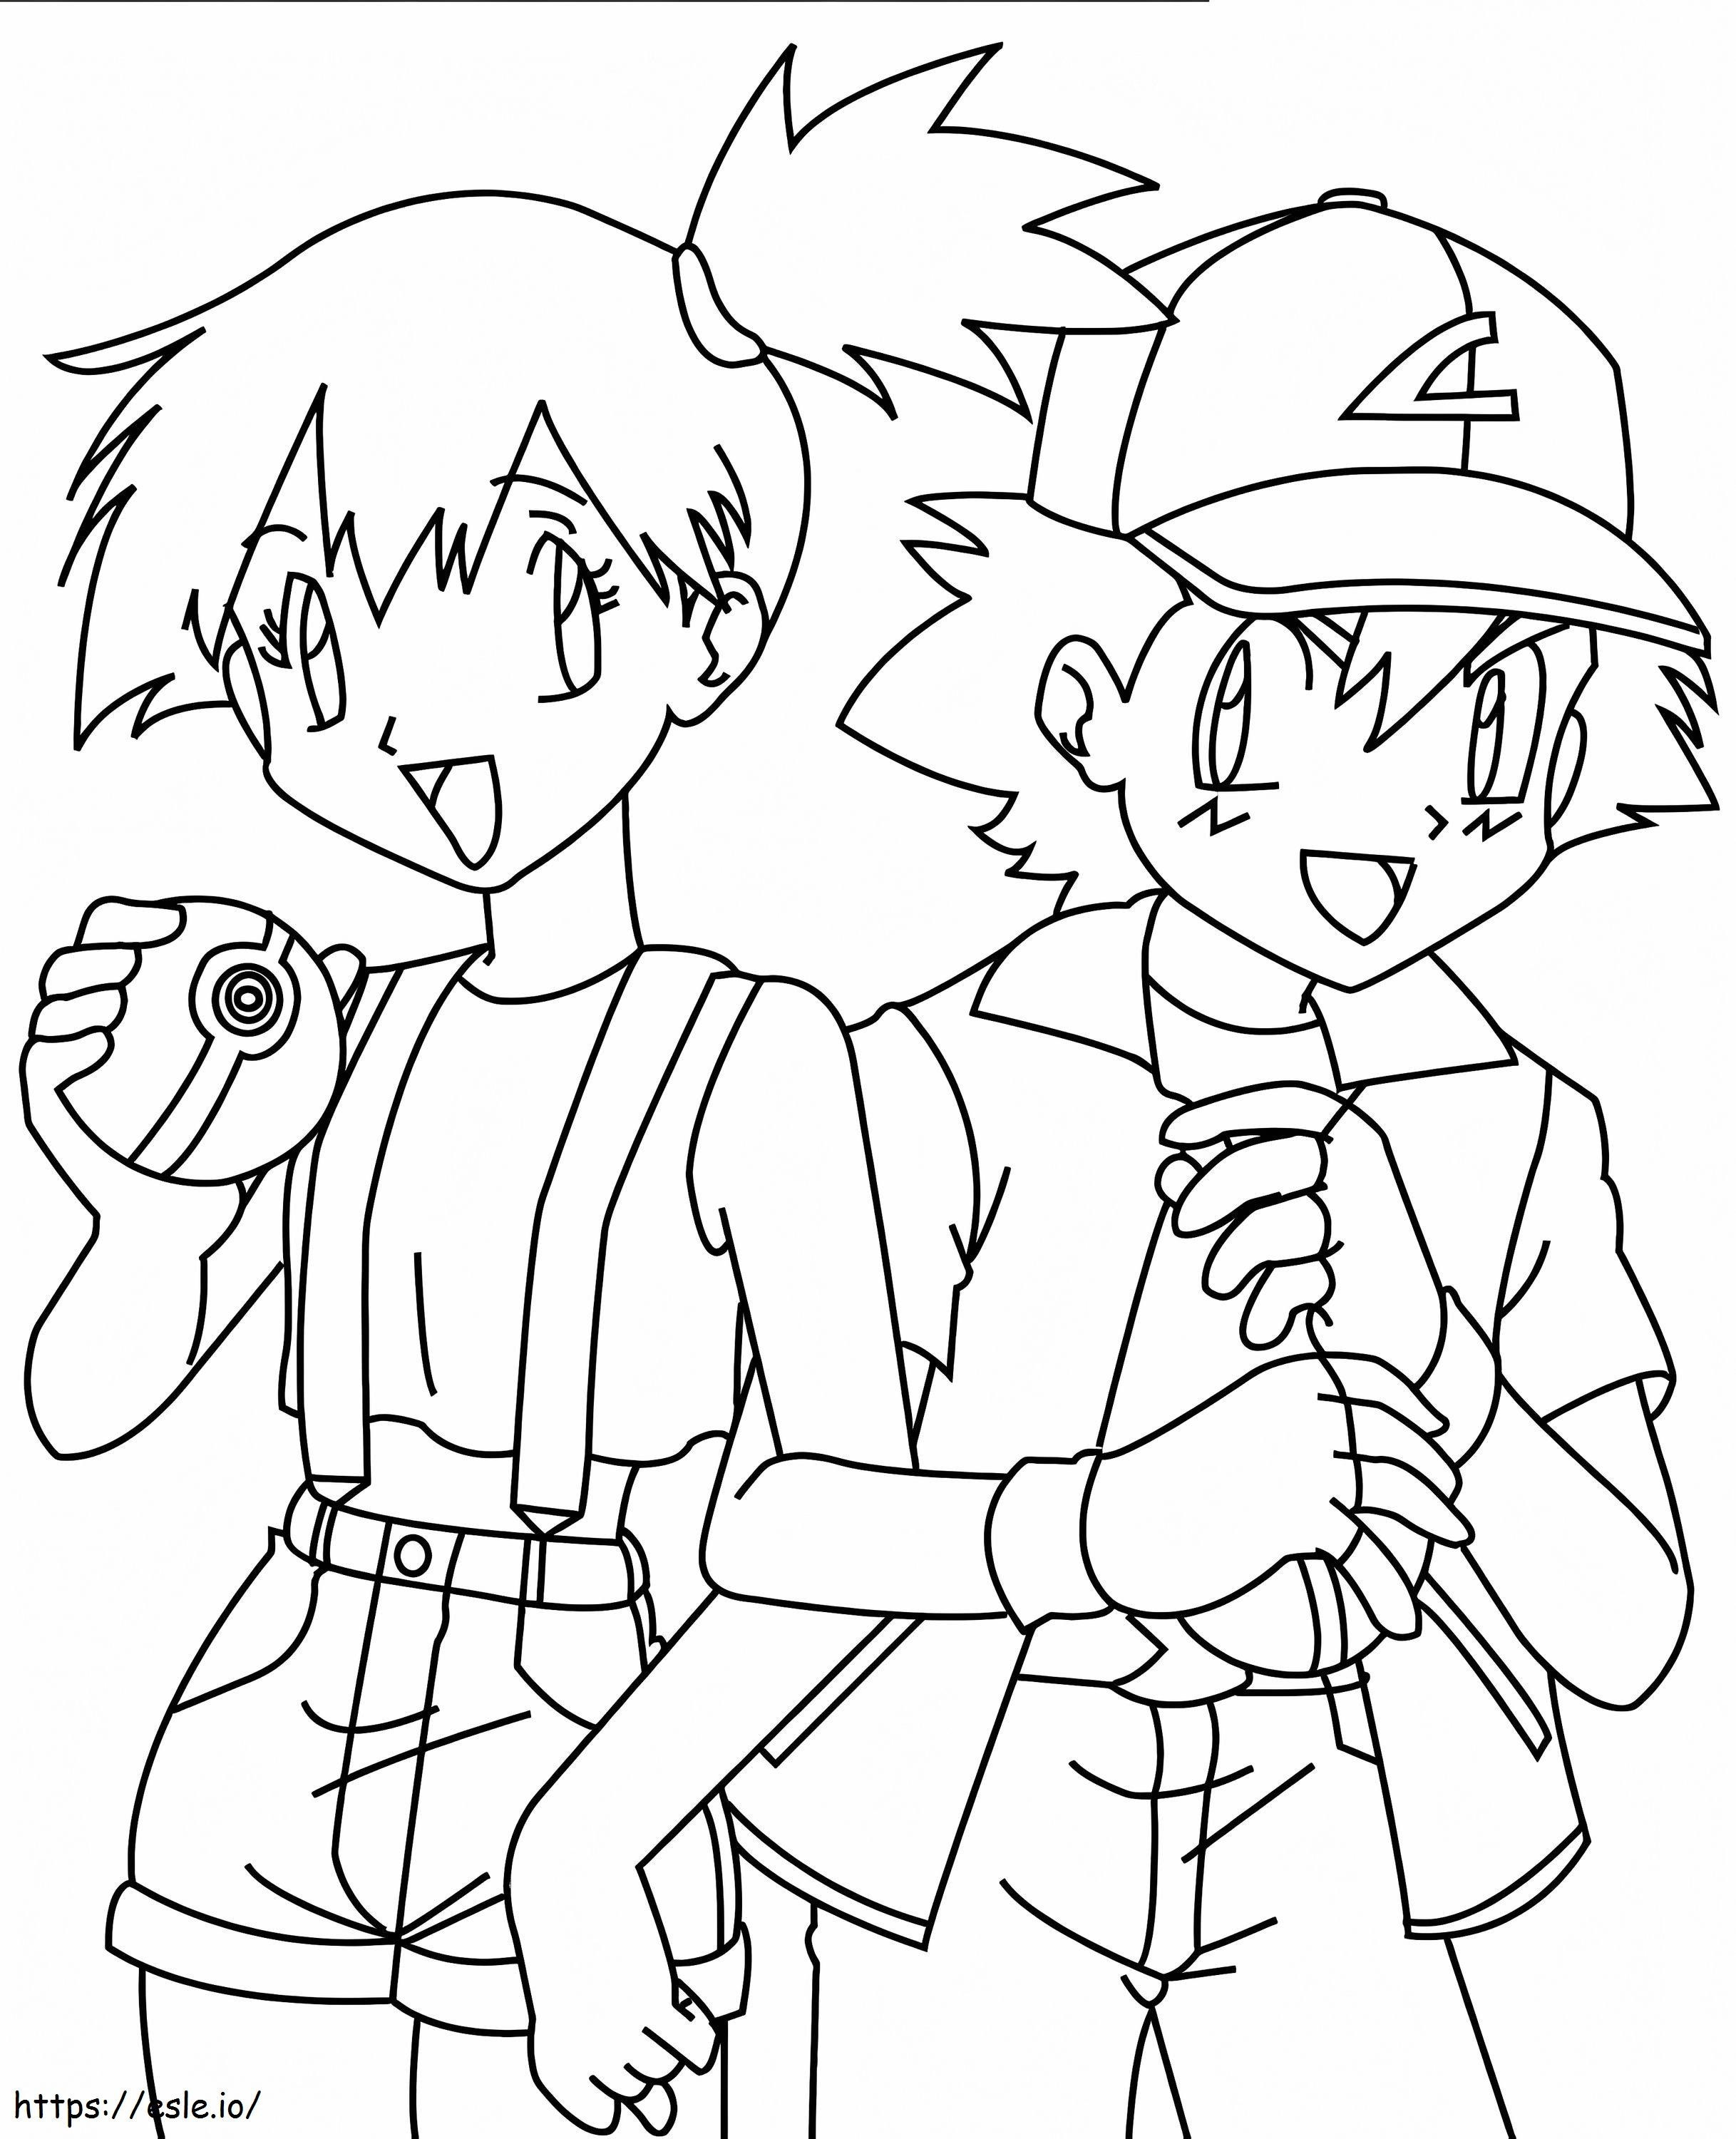 Misty And Ash coloring page